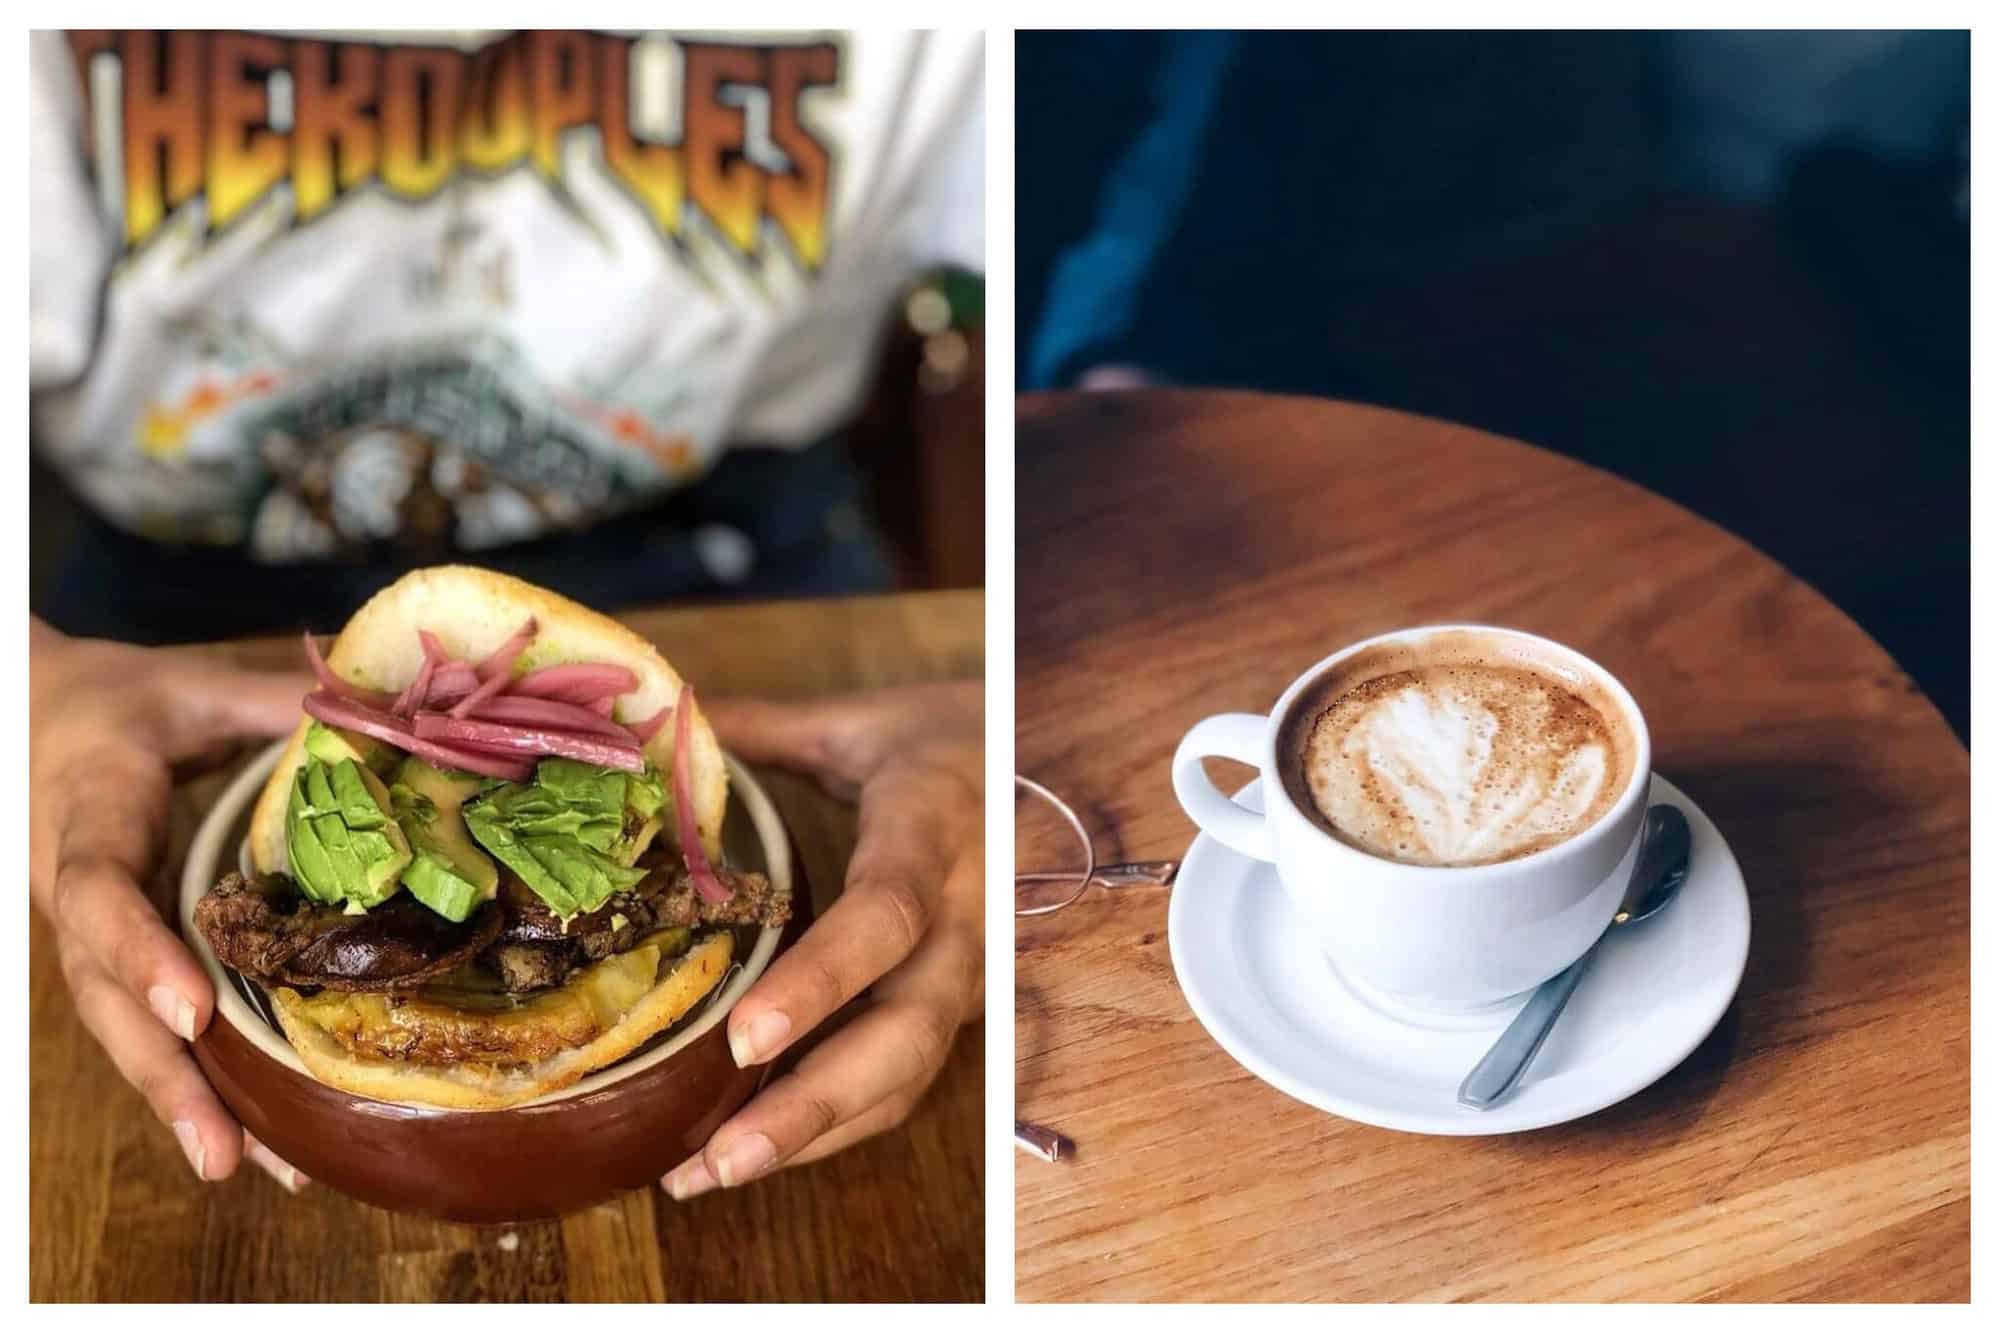 Left: a woman's hands holding a sandwich from Bululu Arepera. There is meat, avocado, and red onion in the sandwich and it is in a traditional Venezuelan bun. Right: a cup of coffee with foamy milk on a table. The cup is white and it is on a white saucer with a small spoon.